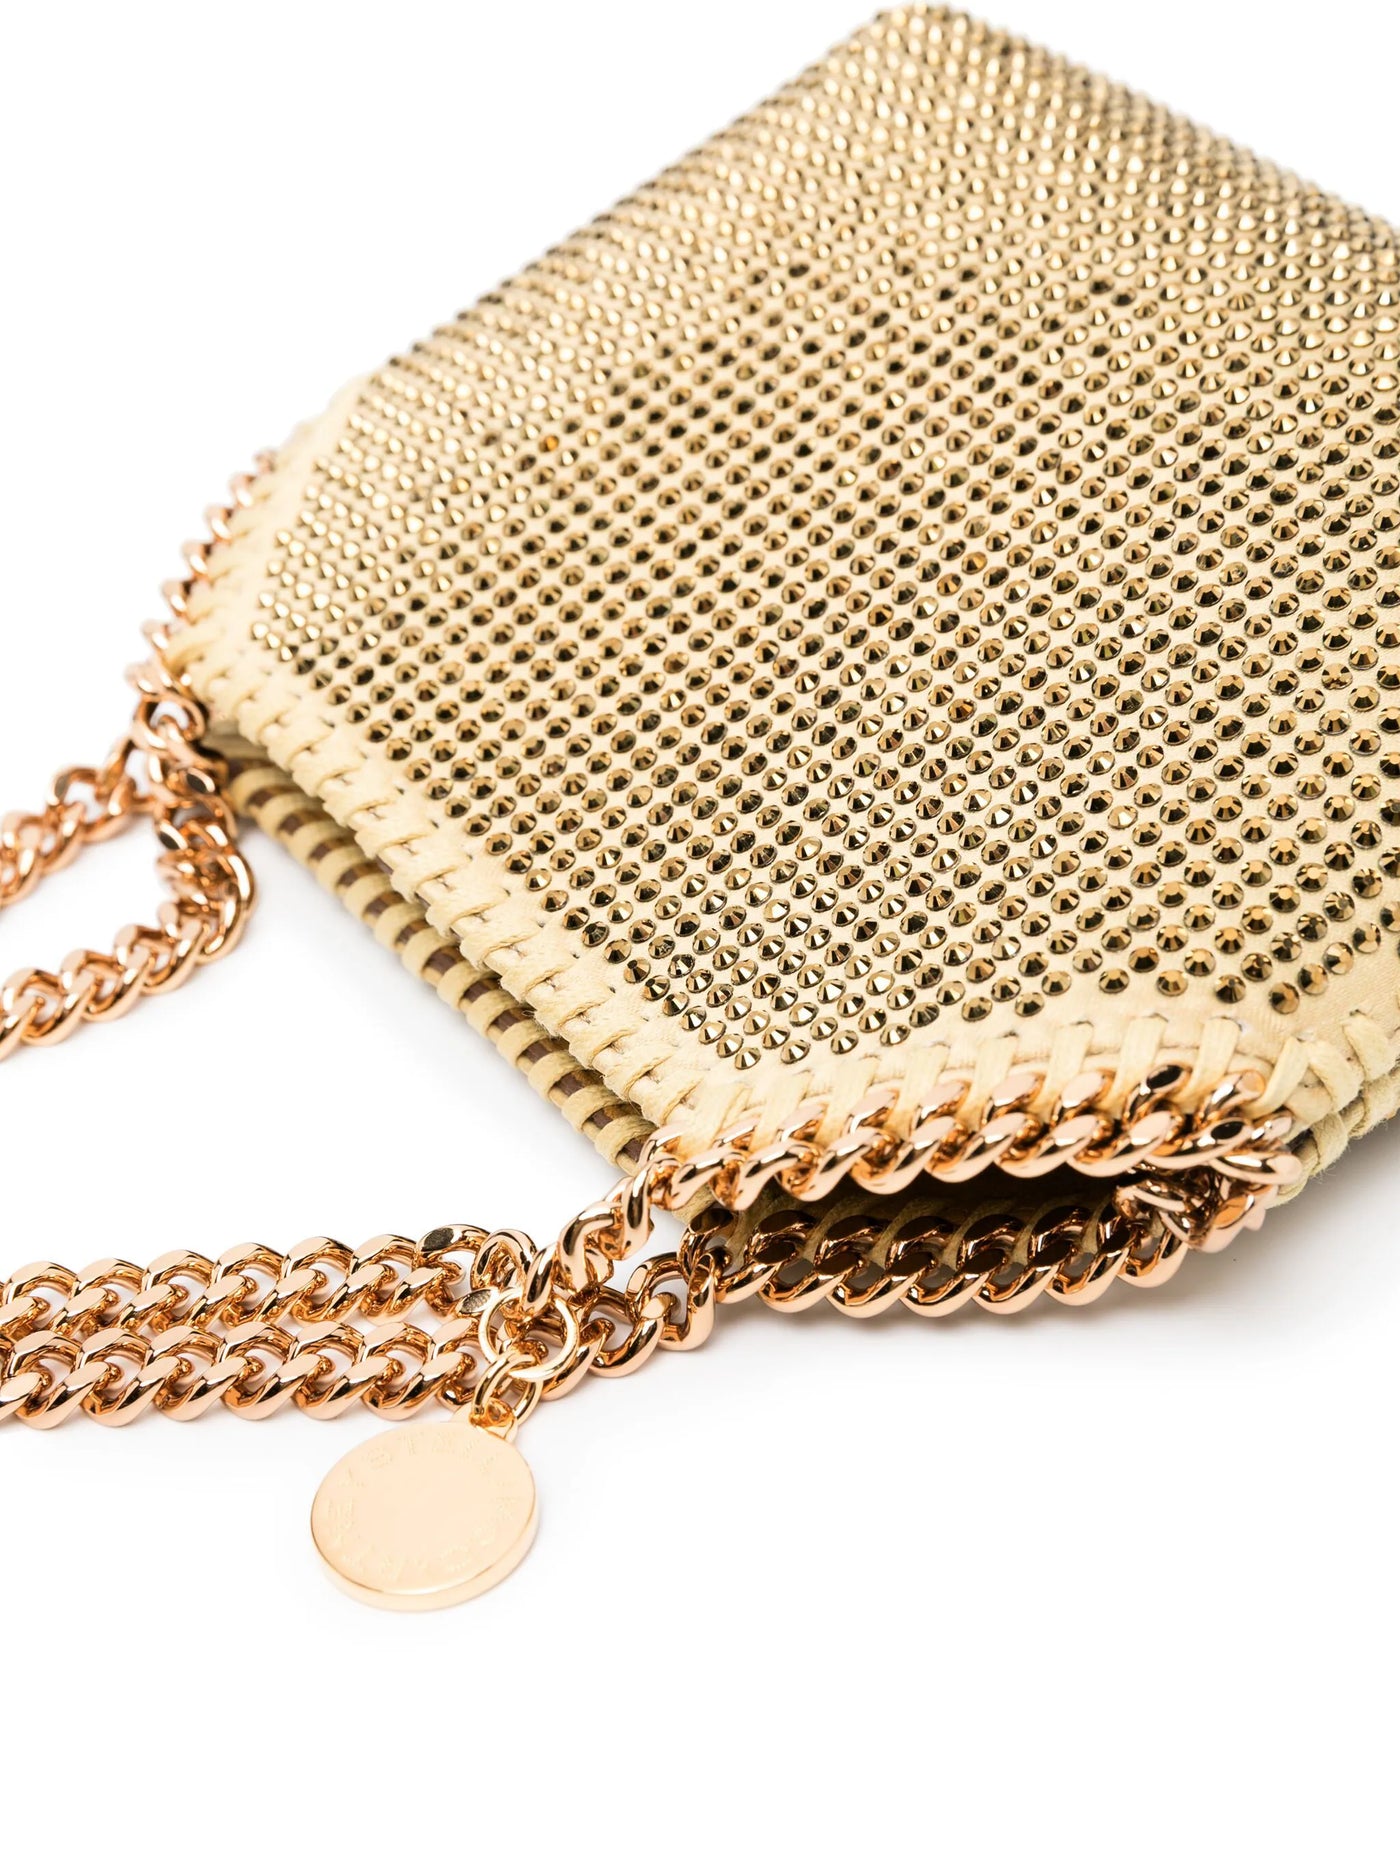 MINI Falabella Bag in ALL OVER CRYSTAL - Gold